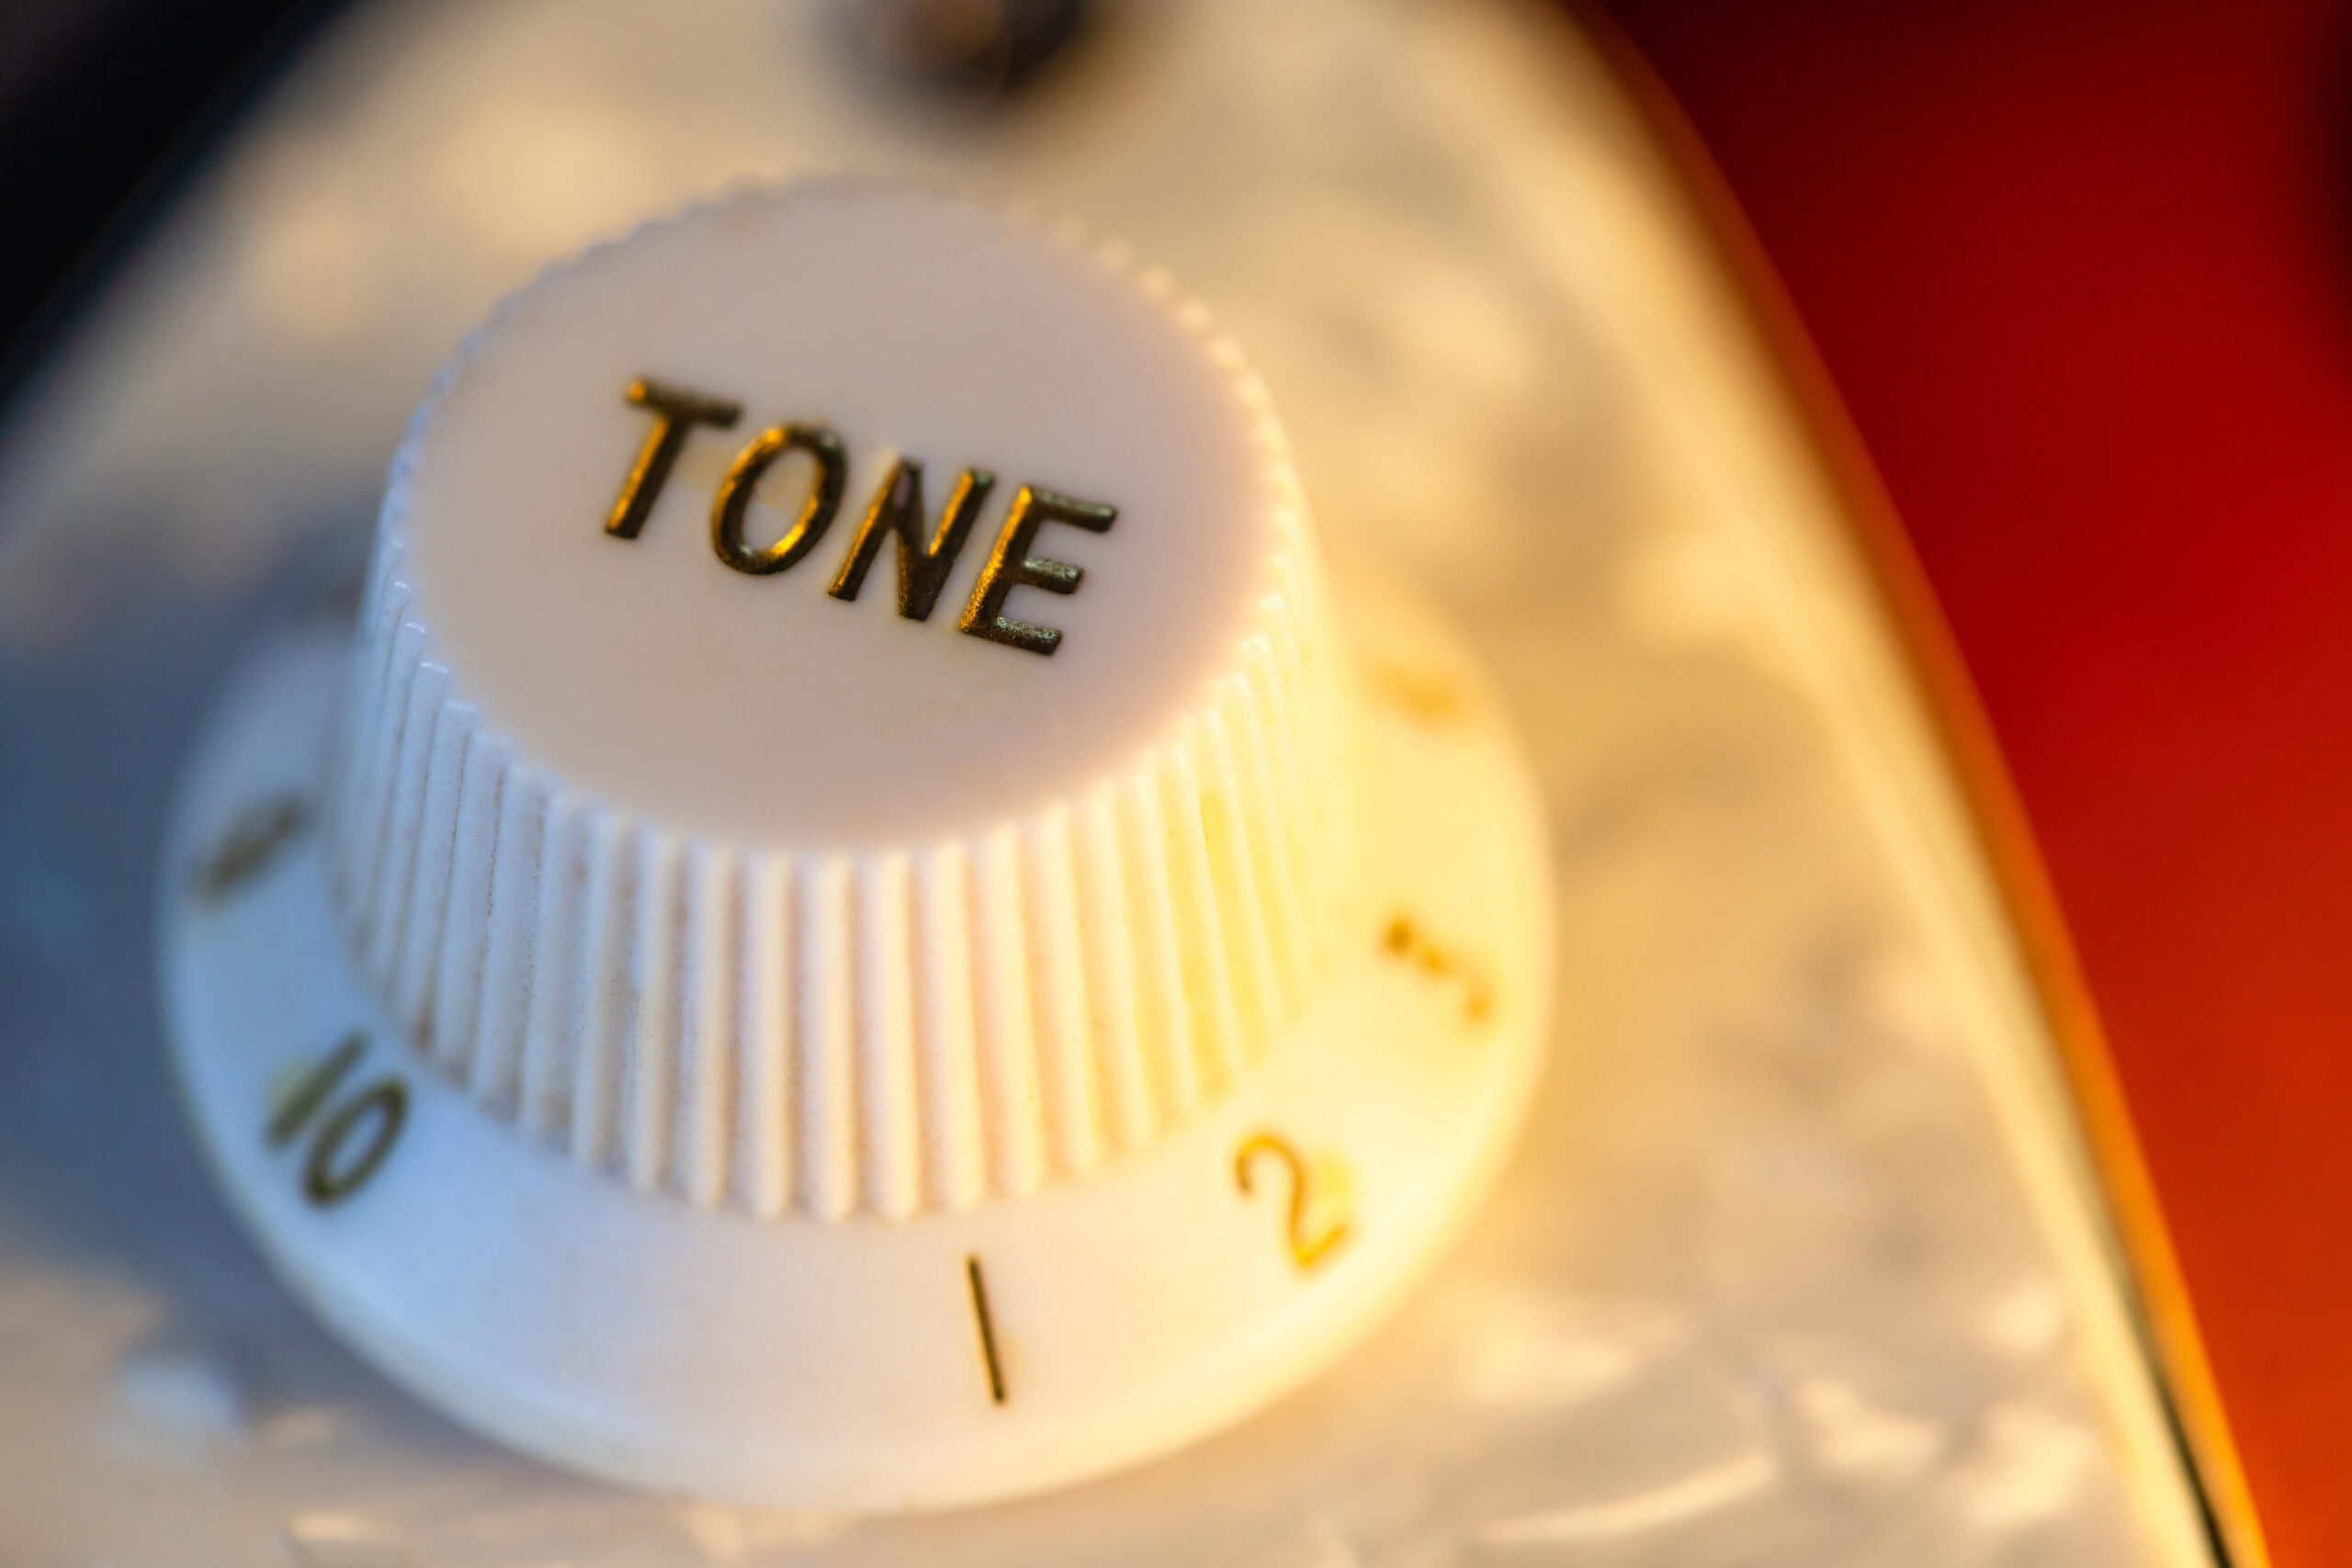 how to choose the appropriate tone when speaking